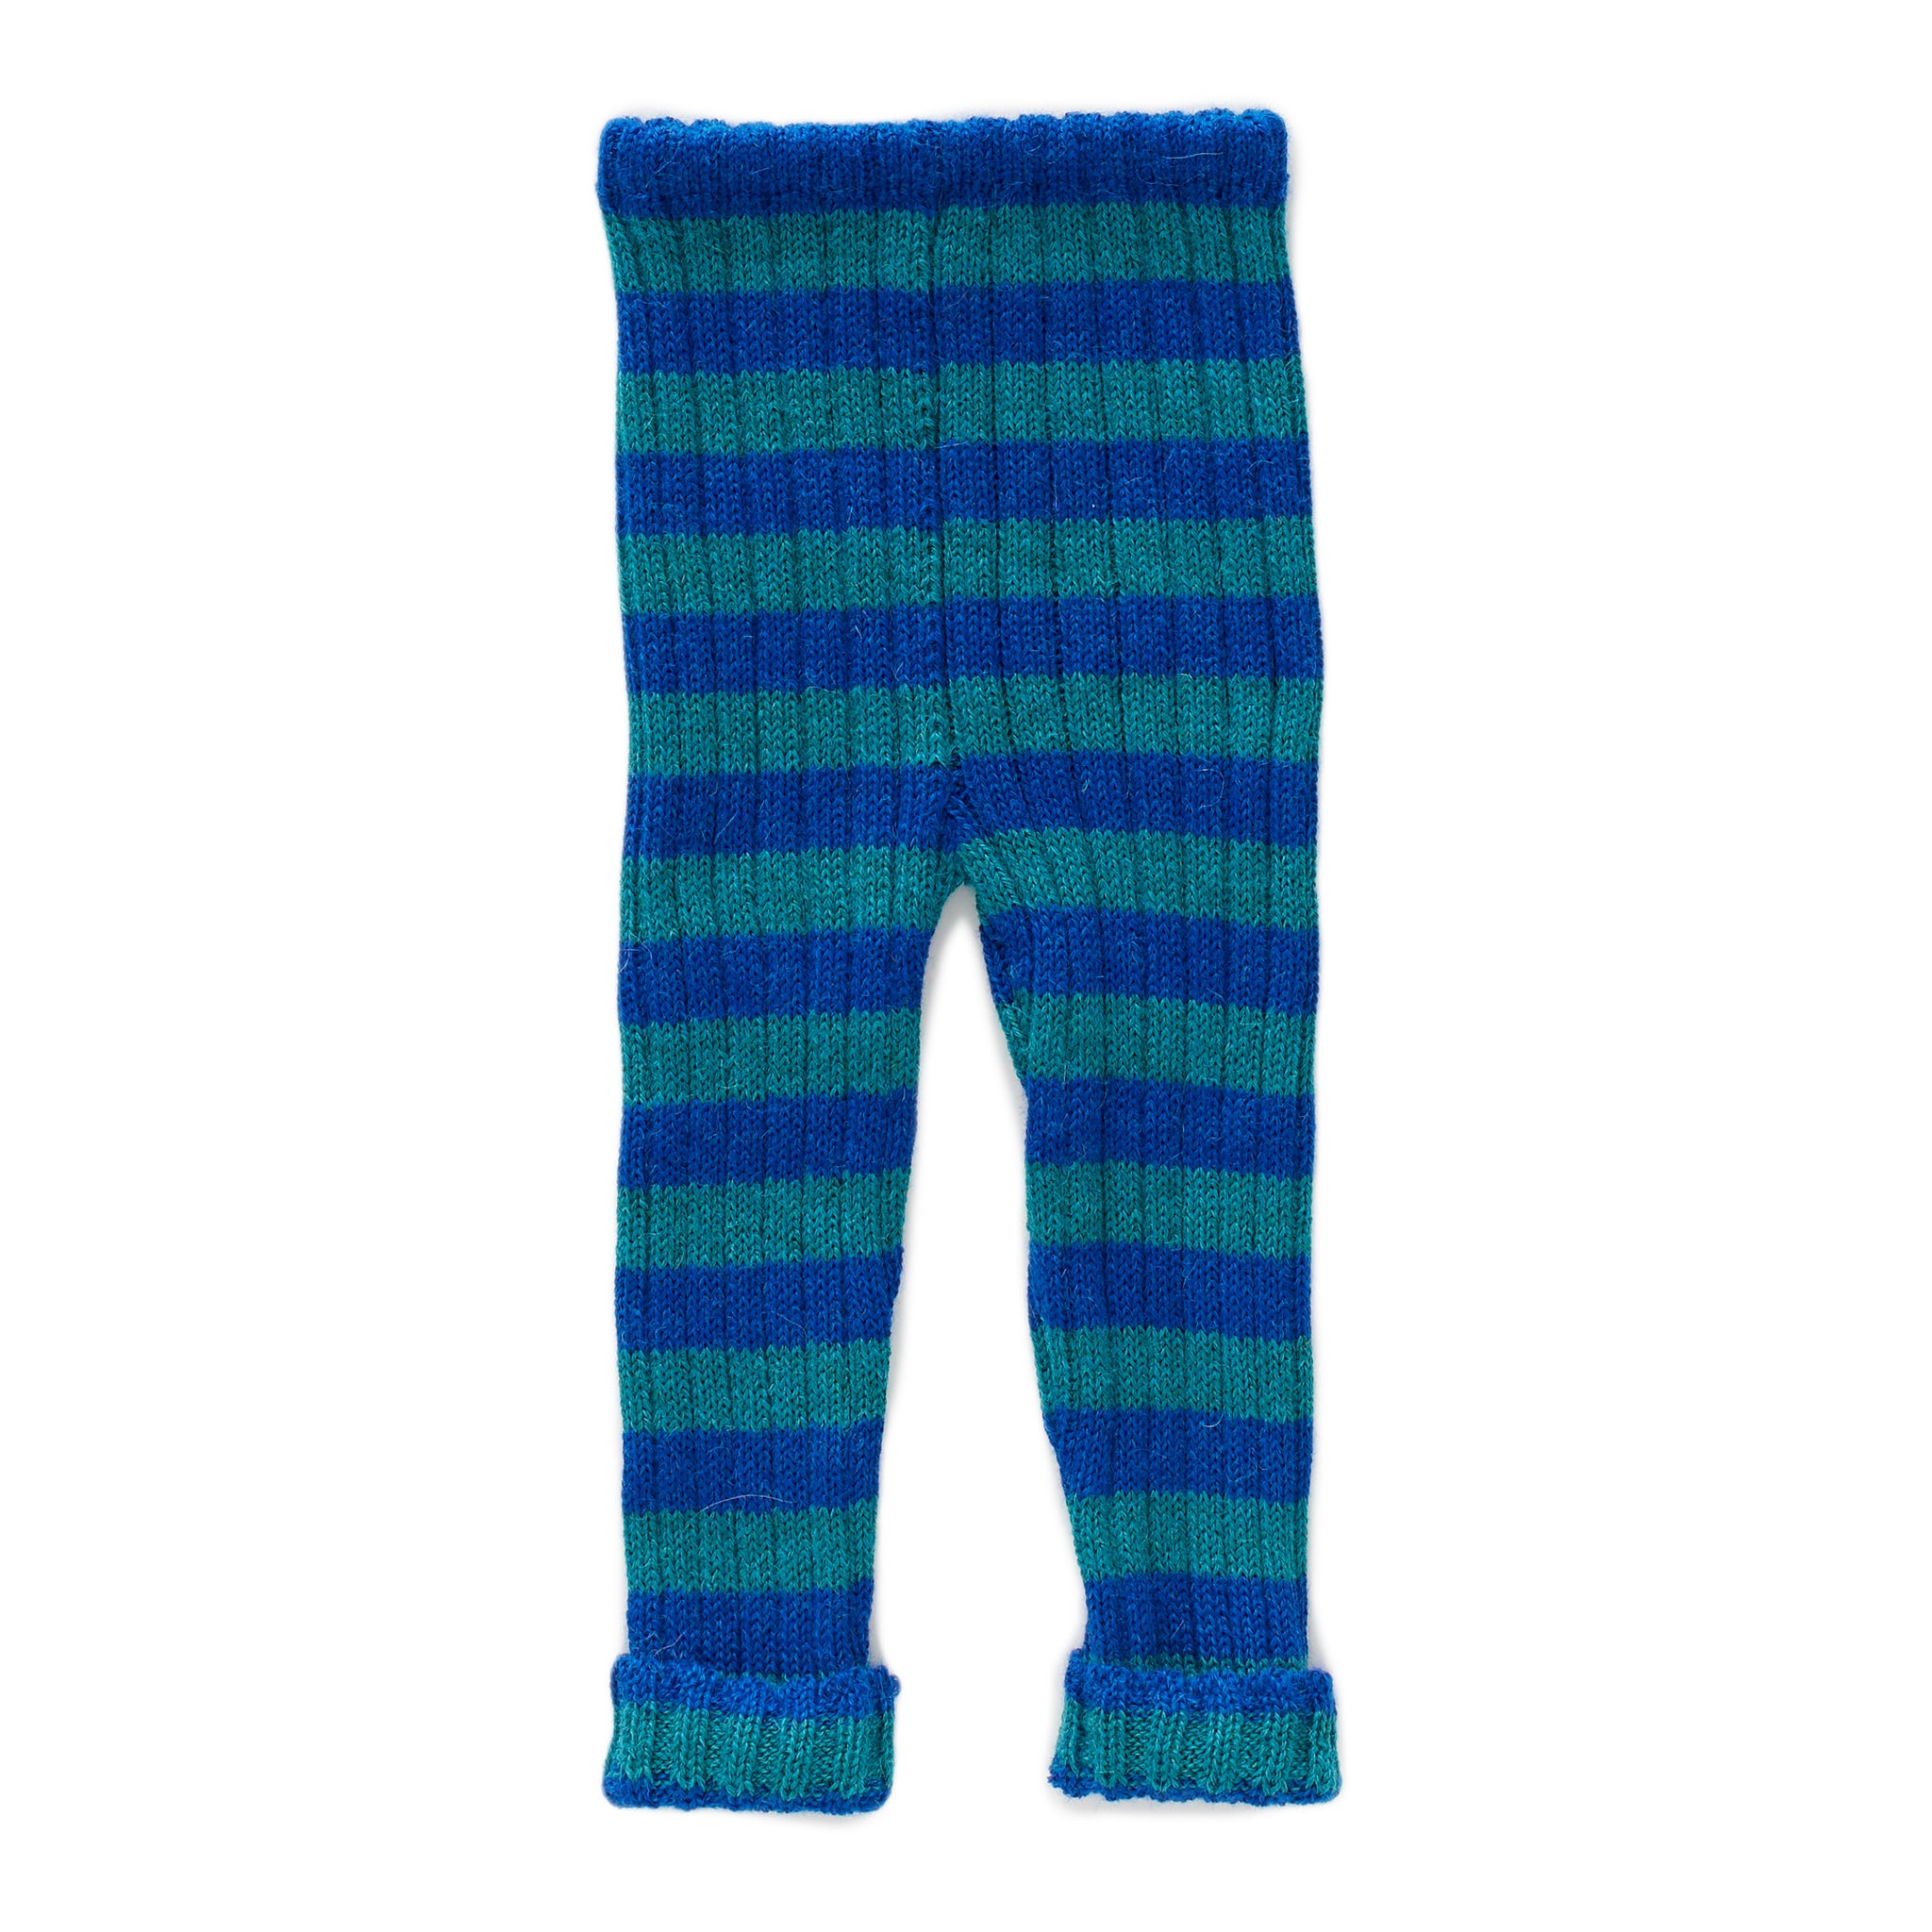 everyday pants, electric blue/teal - Cemarose Children's Fashion Boutique